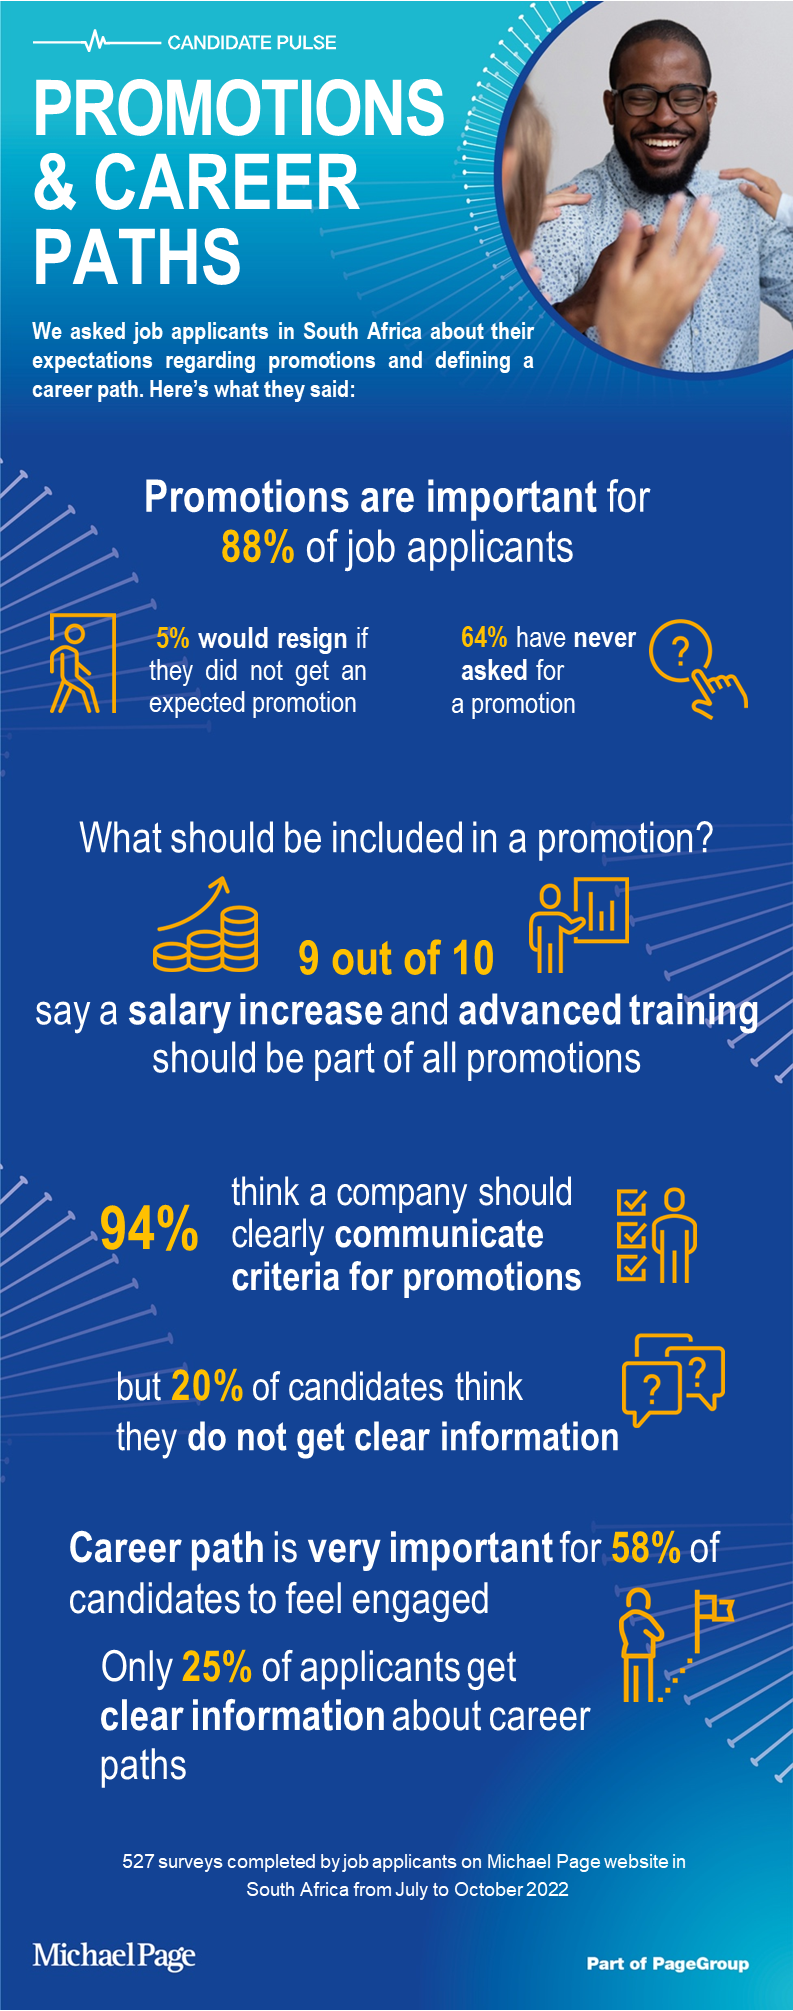 Applicants in South Africa mention that promotions are important.